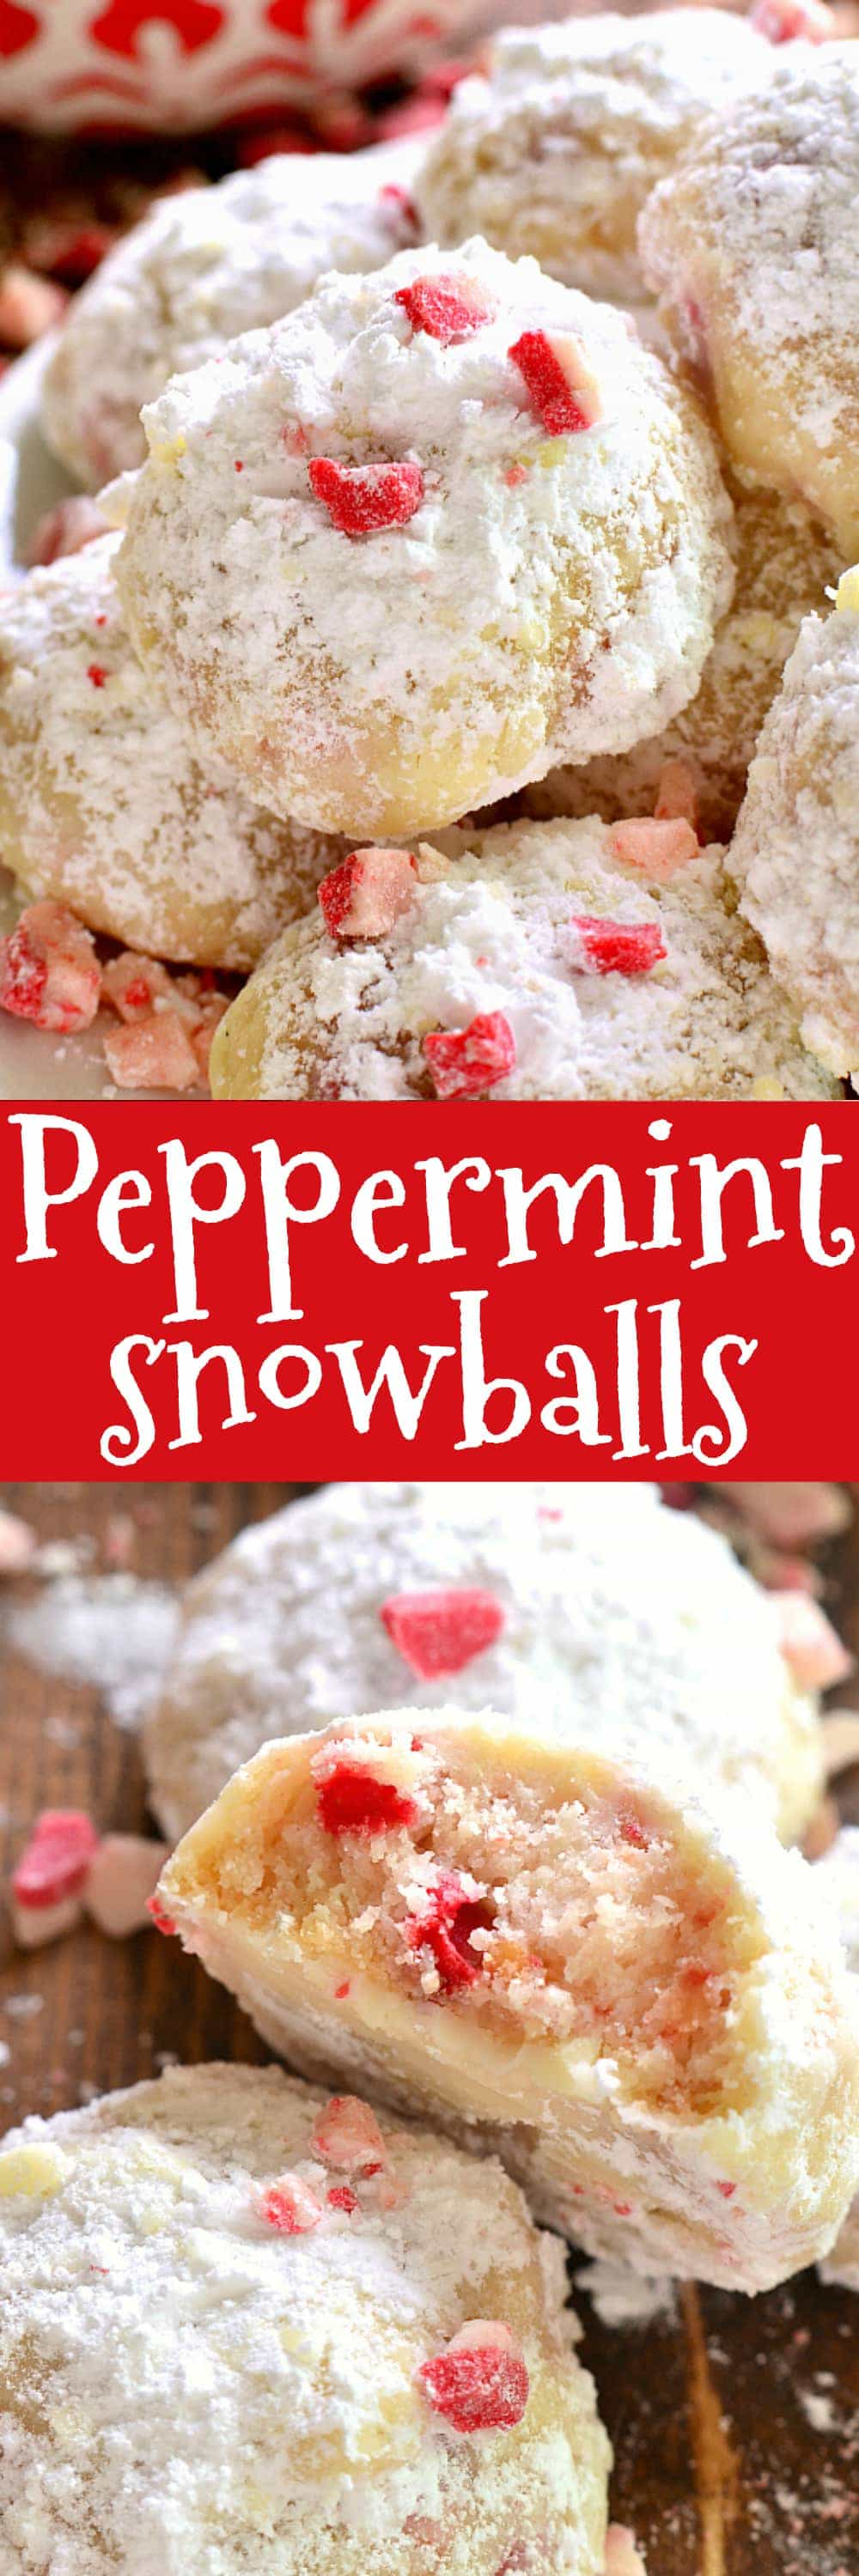 Peppermint Snowballs are the perfect holiday twist on a classic! Packed with delicious peppermint flavor and just the right amount of crunch, these cookies are a must make for all your holiday baking!